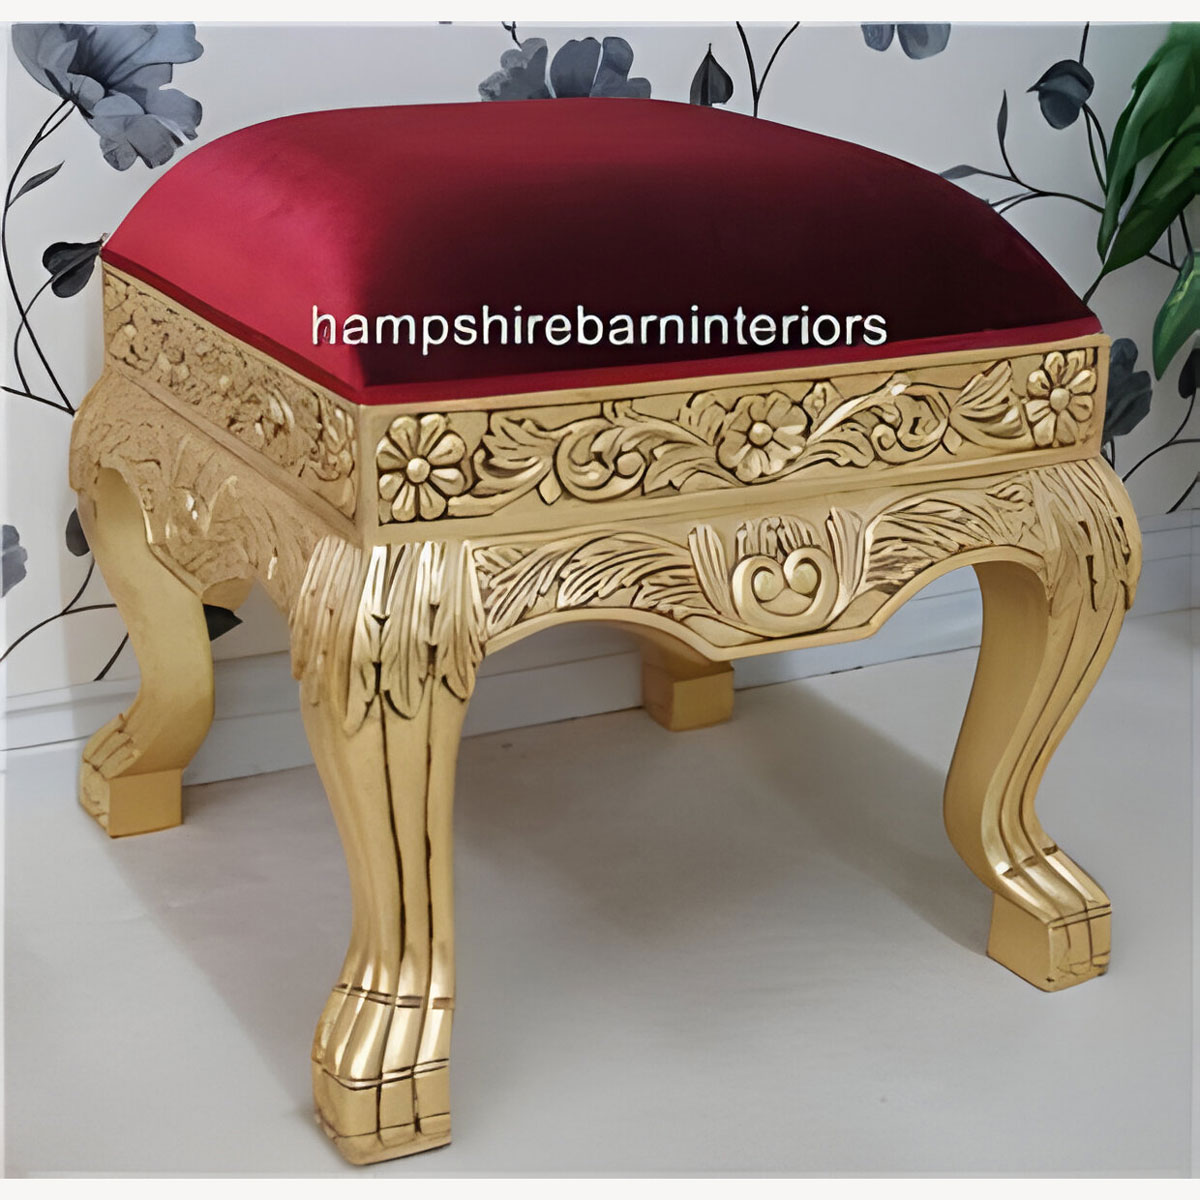 A Gold Leaf Heavily Carved Wedding Or Event Or Home Stool Ottoman Seat 3 - Hampshire Barn Interiors - A Gold Leaf Heavily Carved Wedding Or Event Or Home Stool / Ottoman Seat -